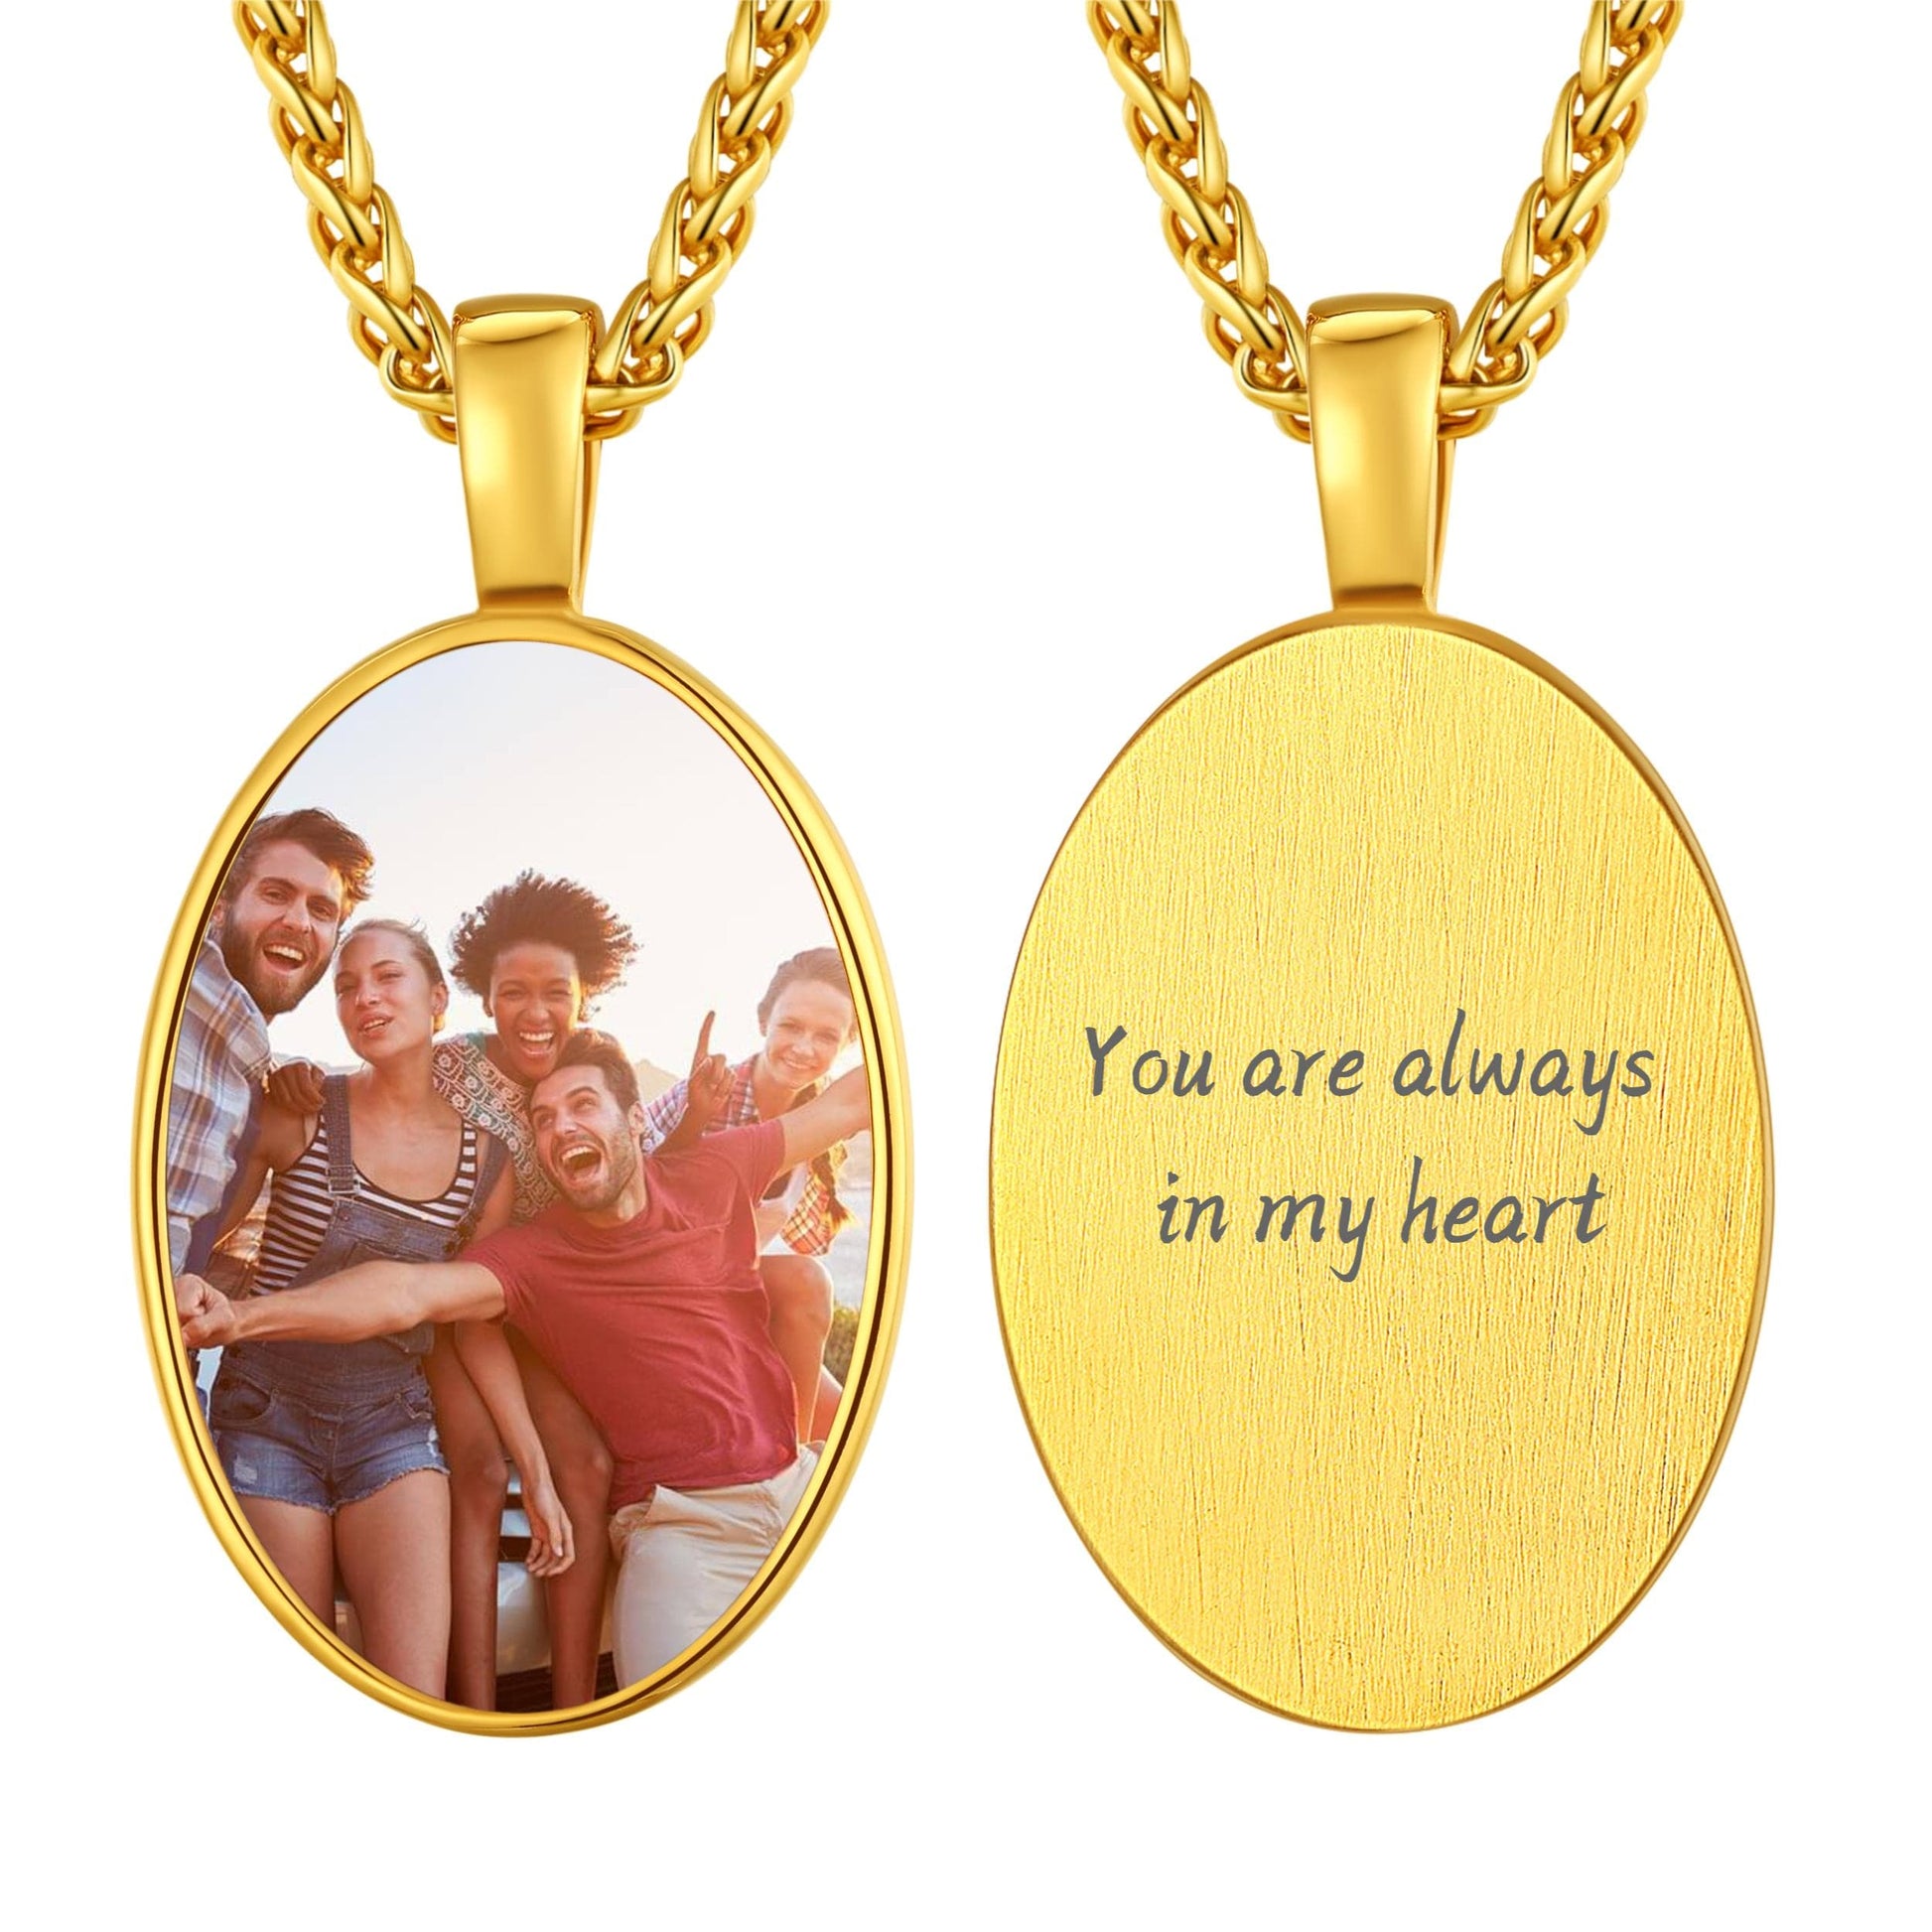 Birthstonesjewelry Personalized Oval Photo Necklace with Message Gold